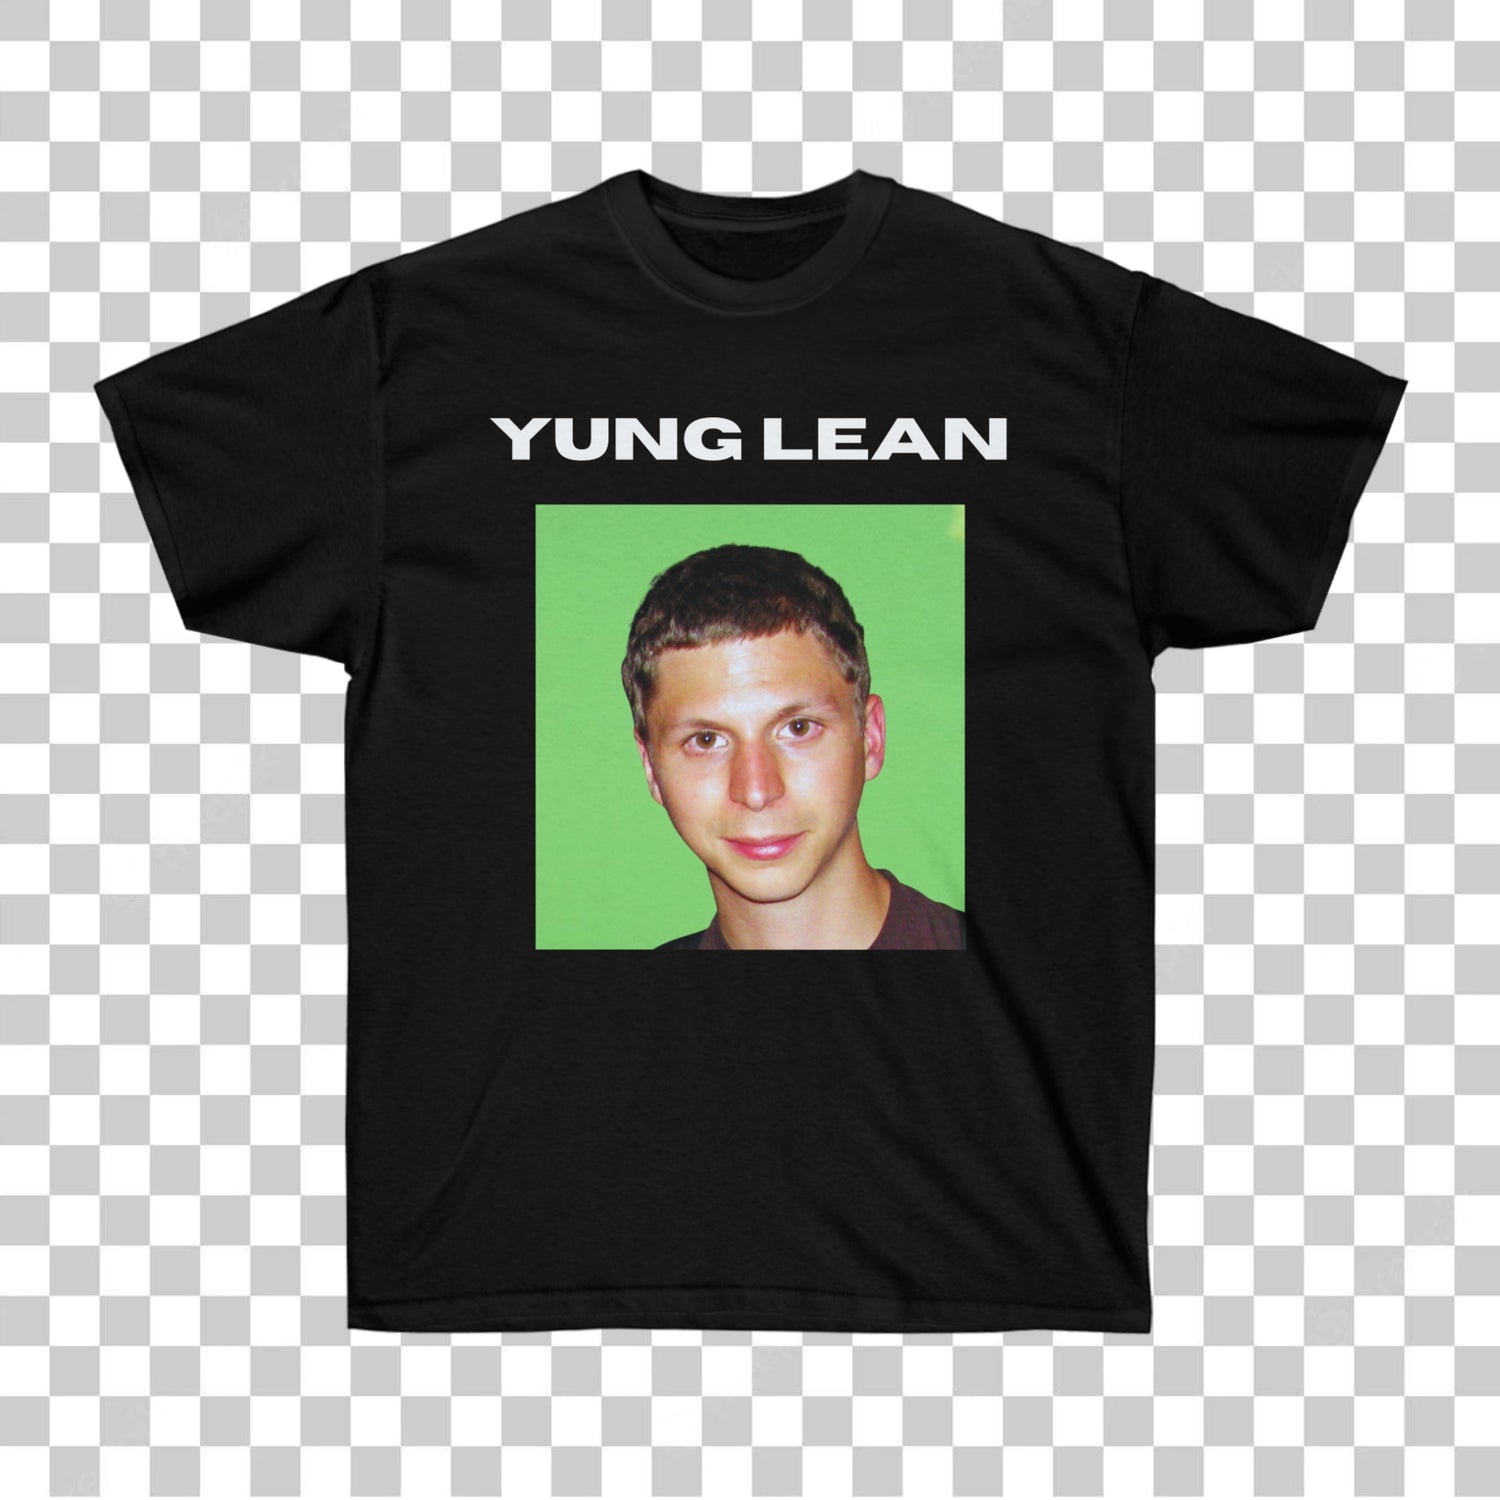 T shirt with Michael Cera as Yung Lean